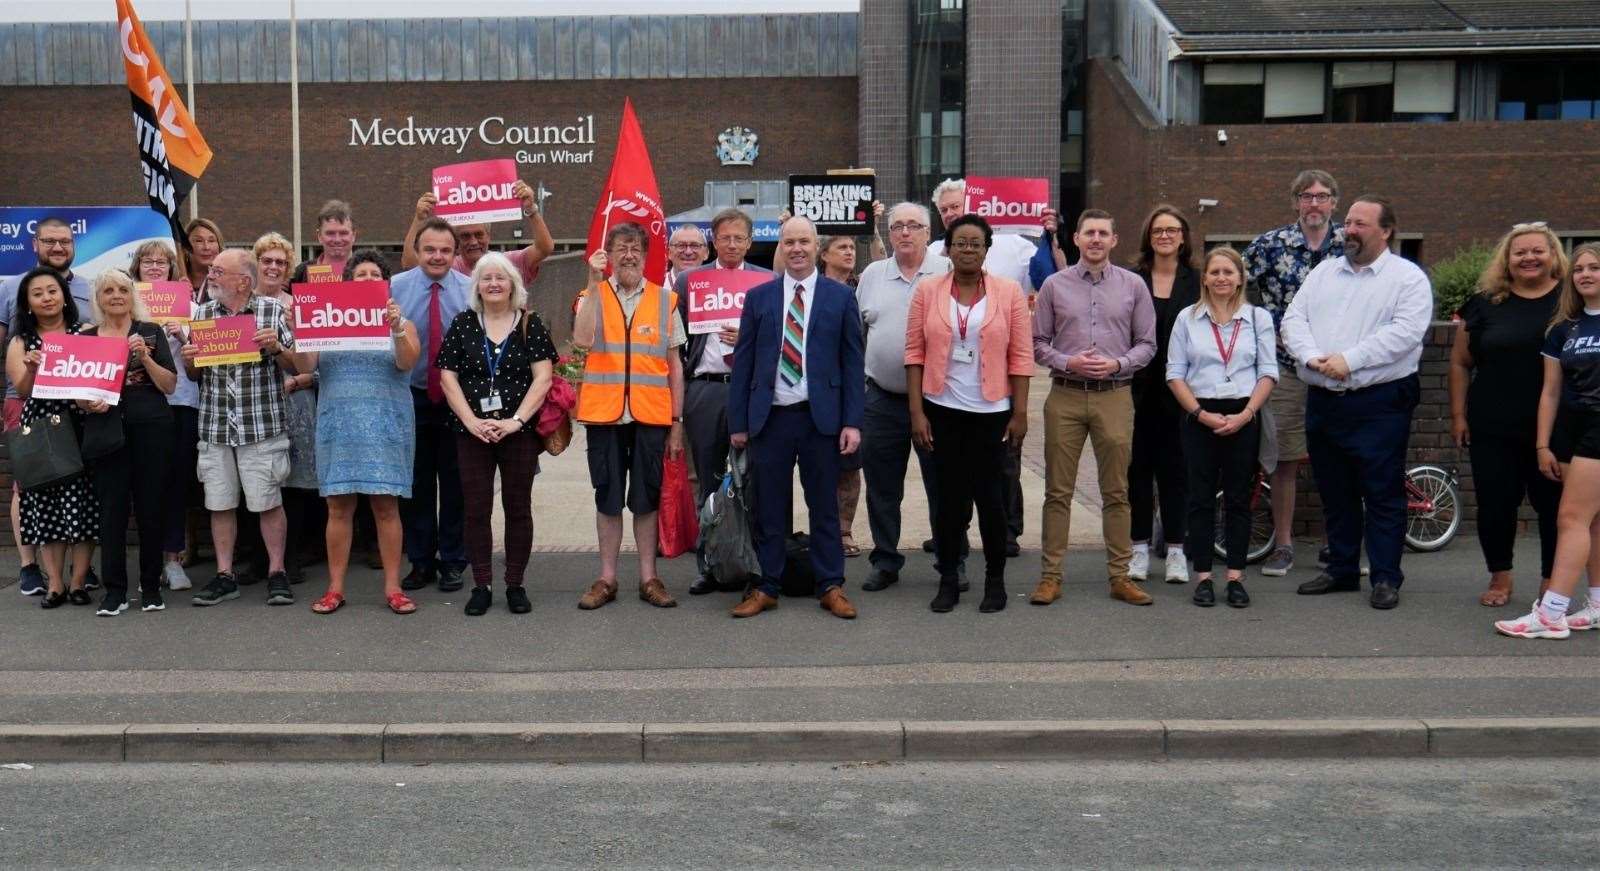 Labour's cost of living rally outside Medway Council HQ in July 2022